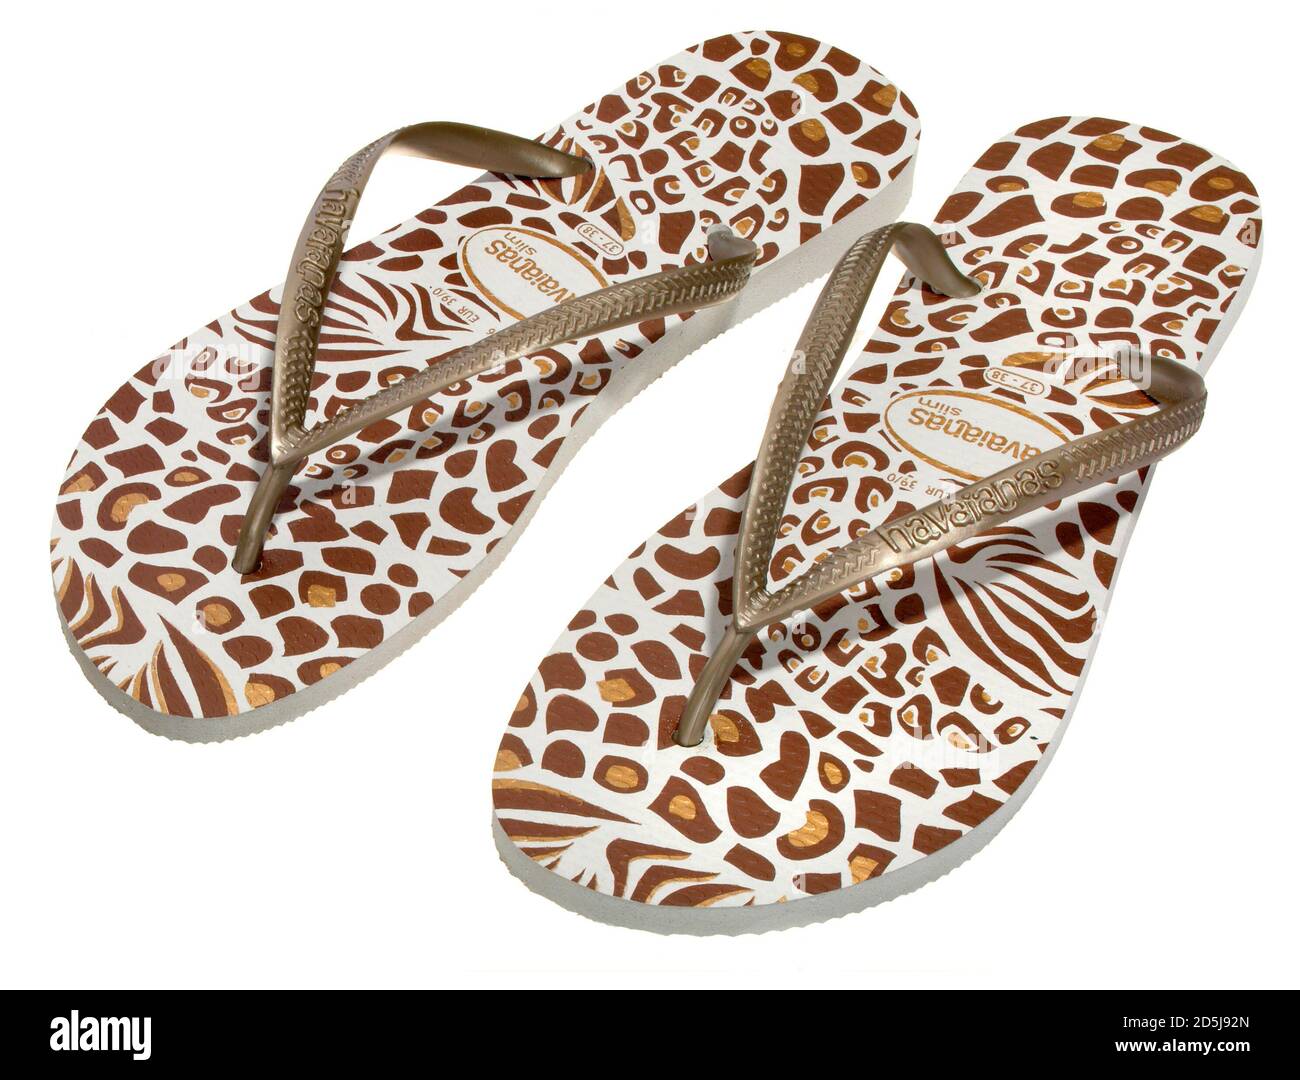 brown and gold animal print havaianas flip flops photographed on a white background Stock Photo